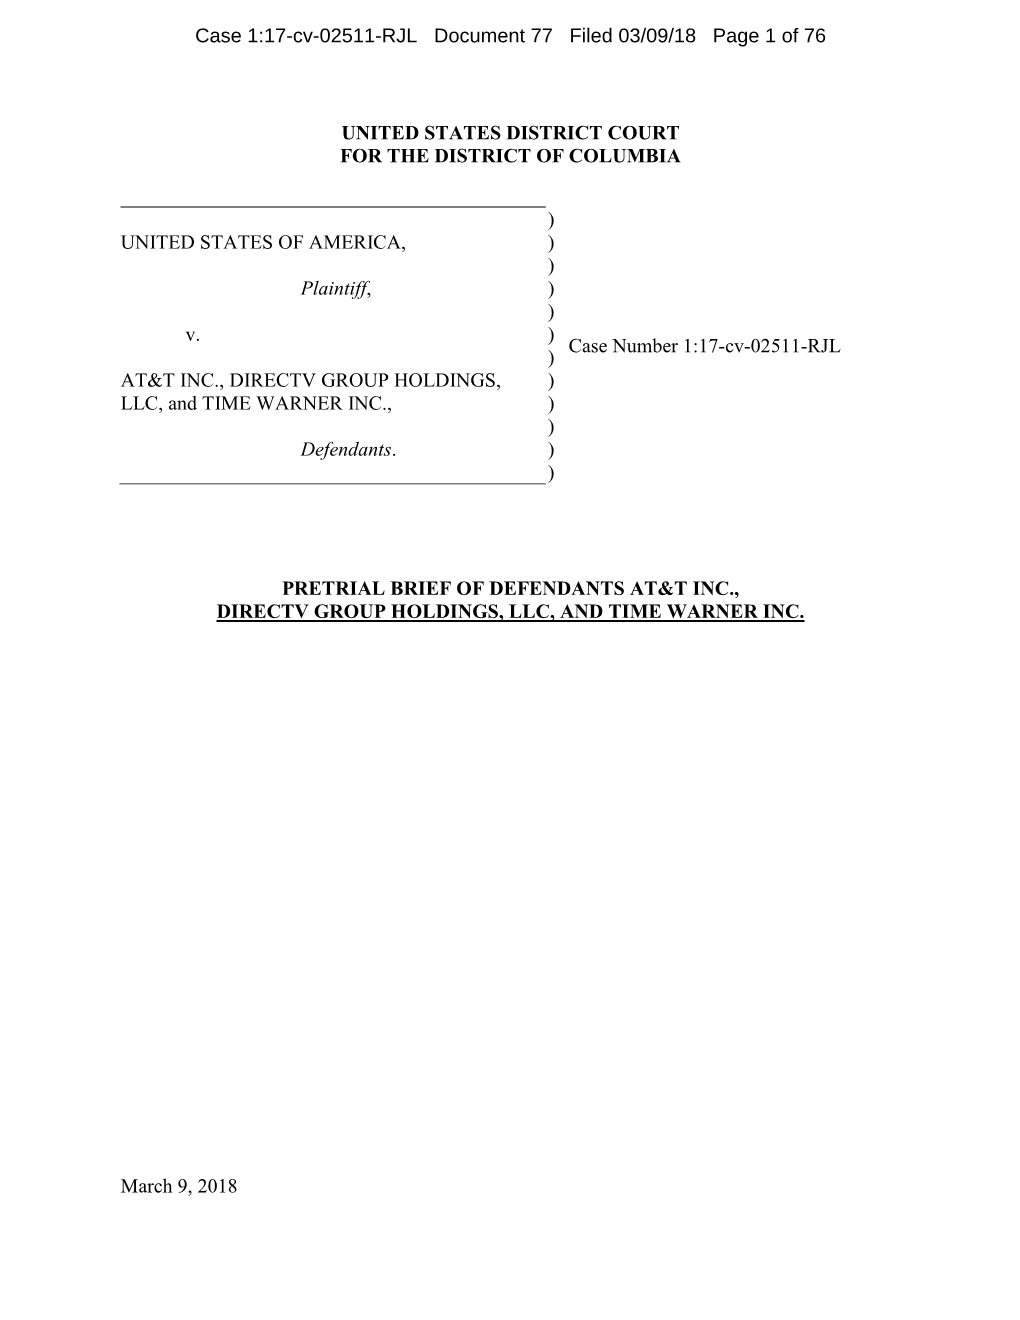 Case 1:17-Cv-02511-RJL Document 77 Filed 03/09/18 Page 1 of 76